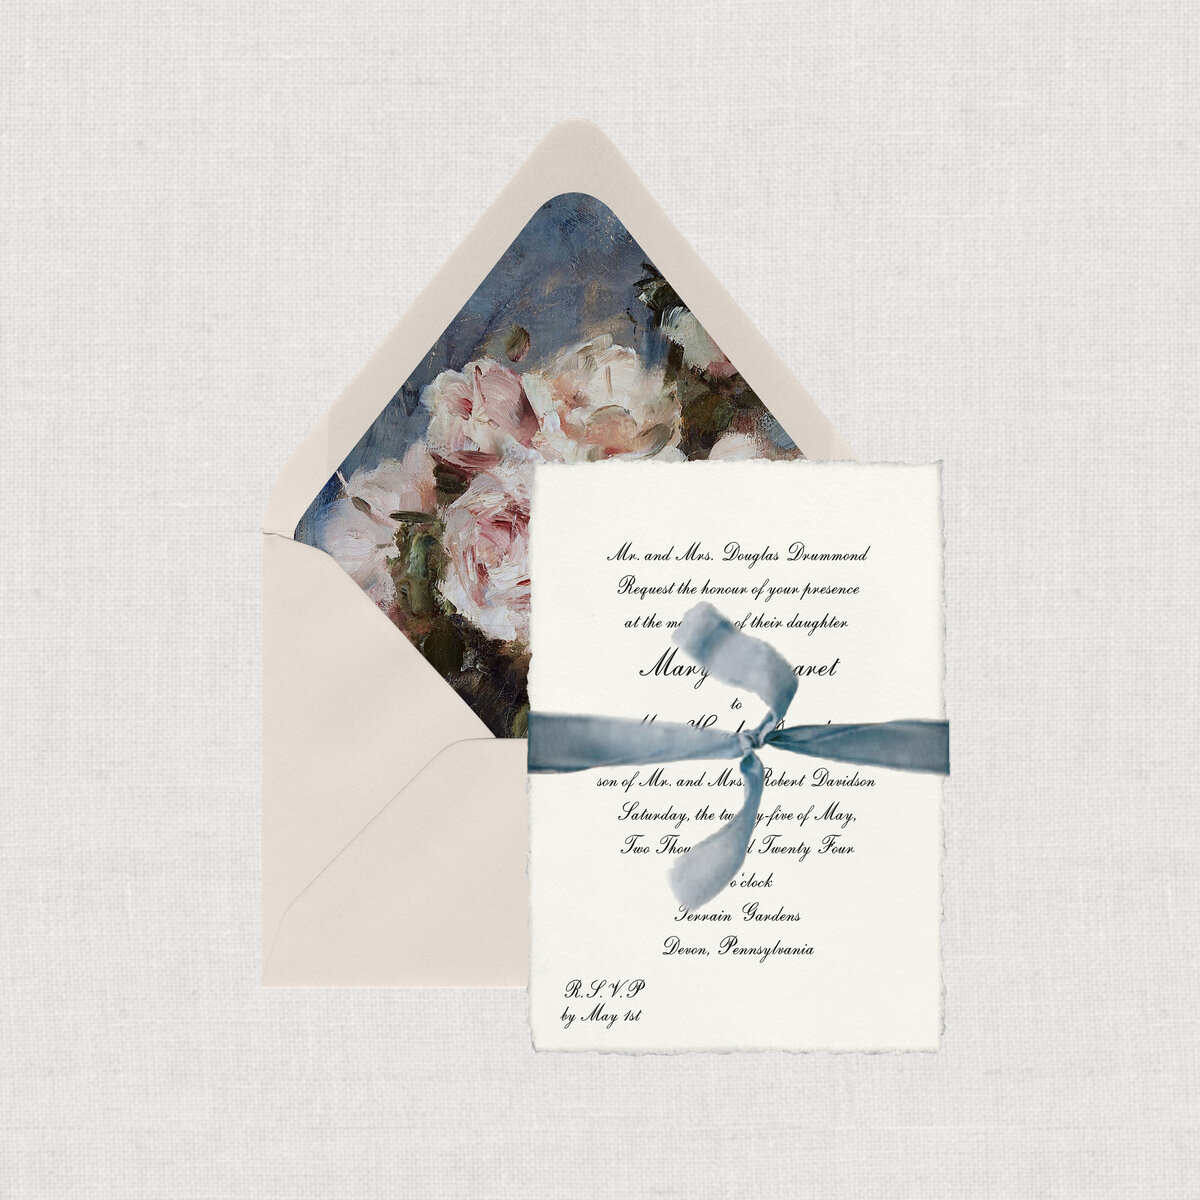 Vintage 1940 wedding invitation suite tied with dusty blue ribbon.